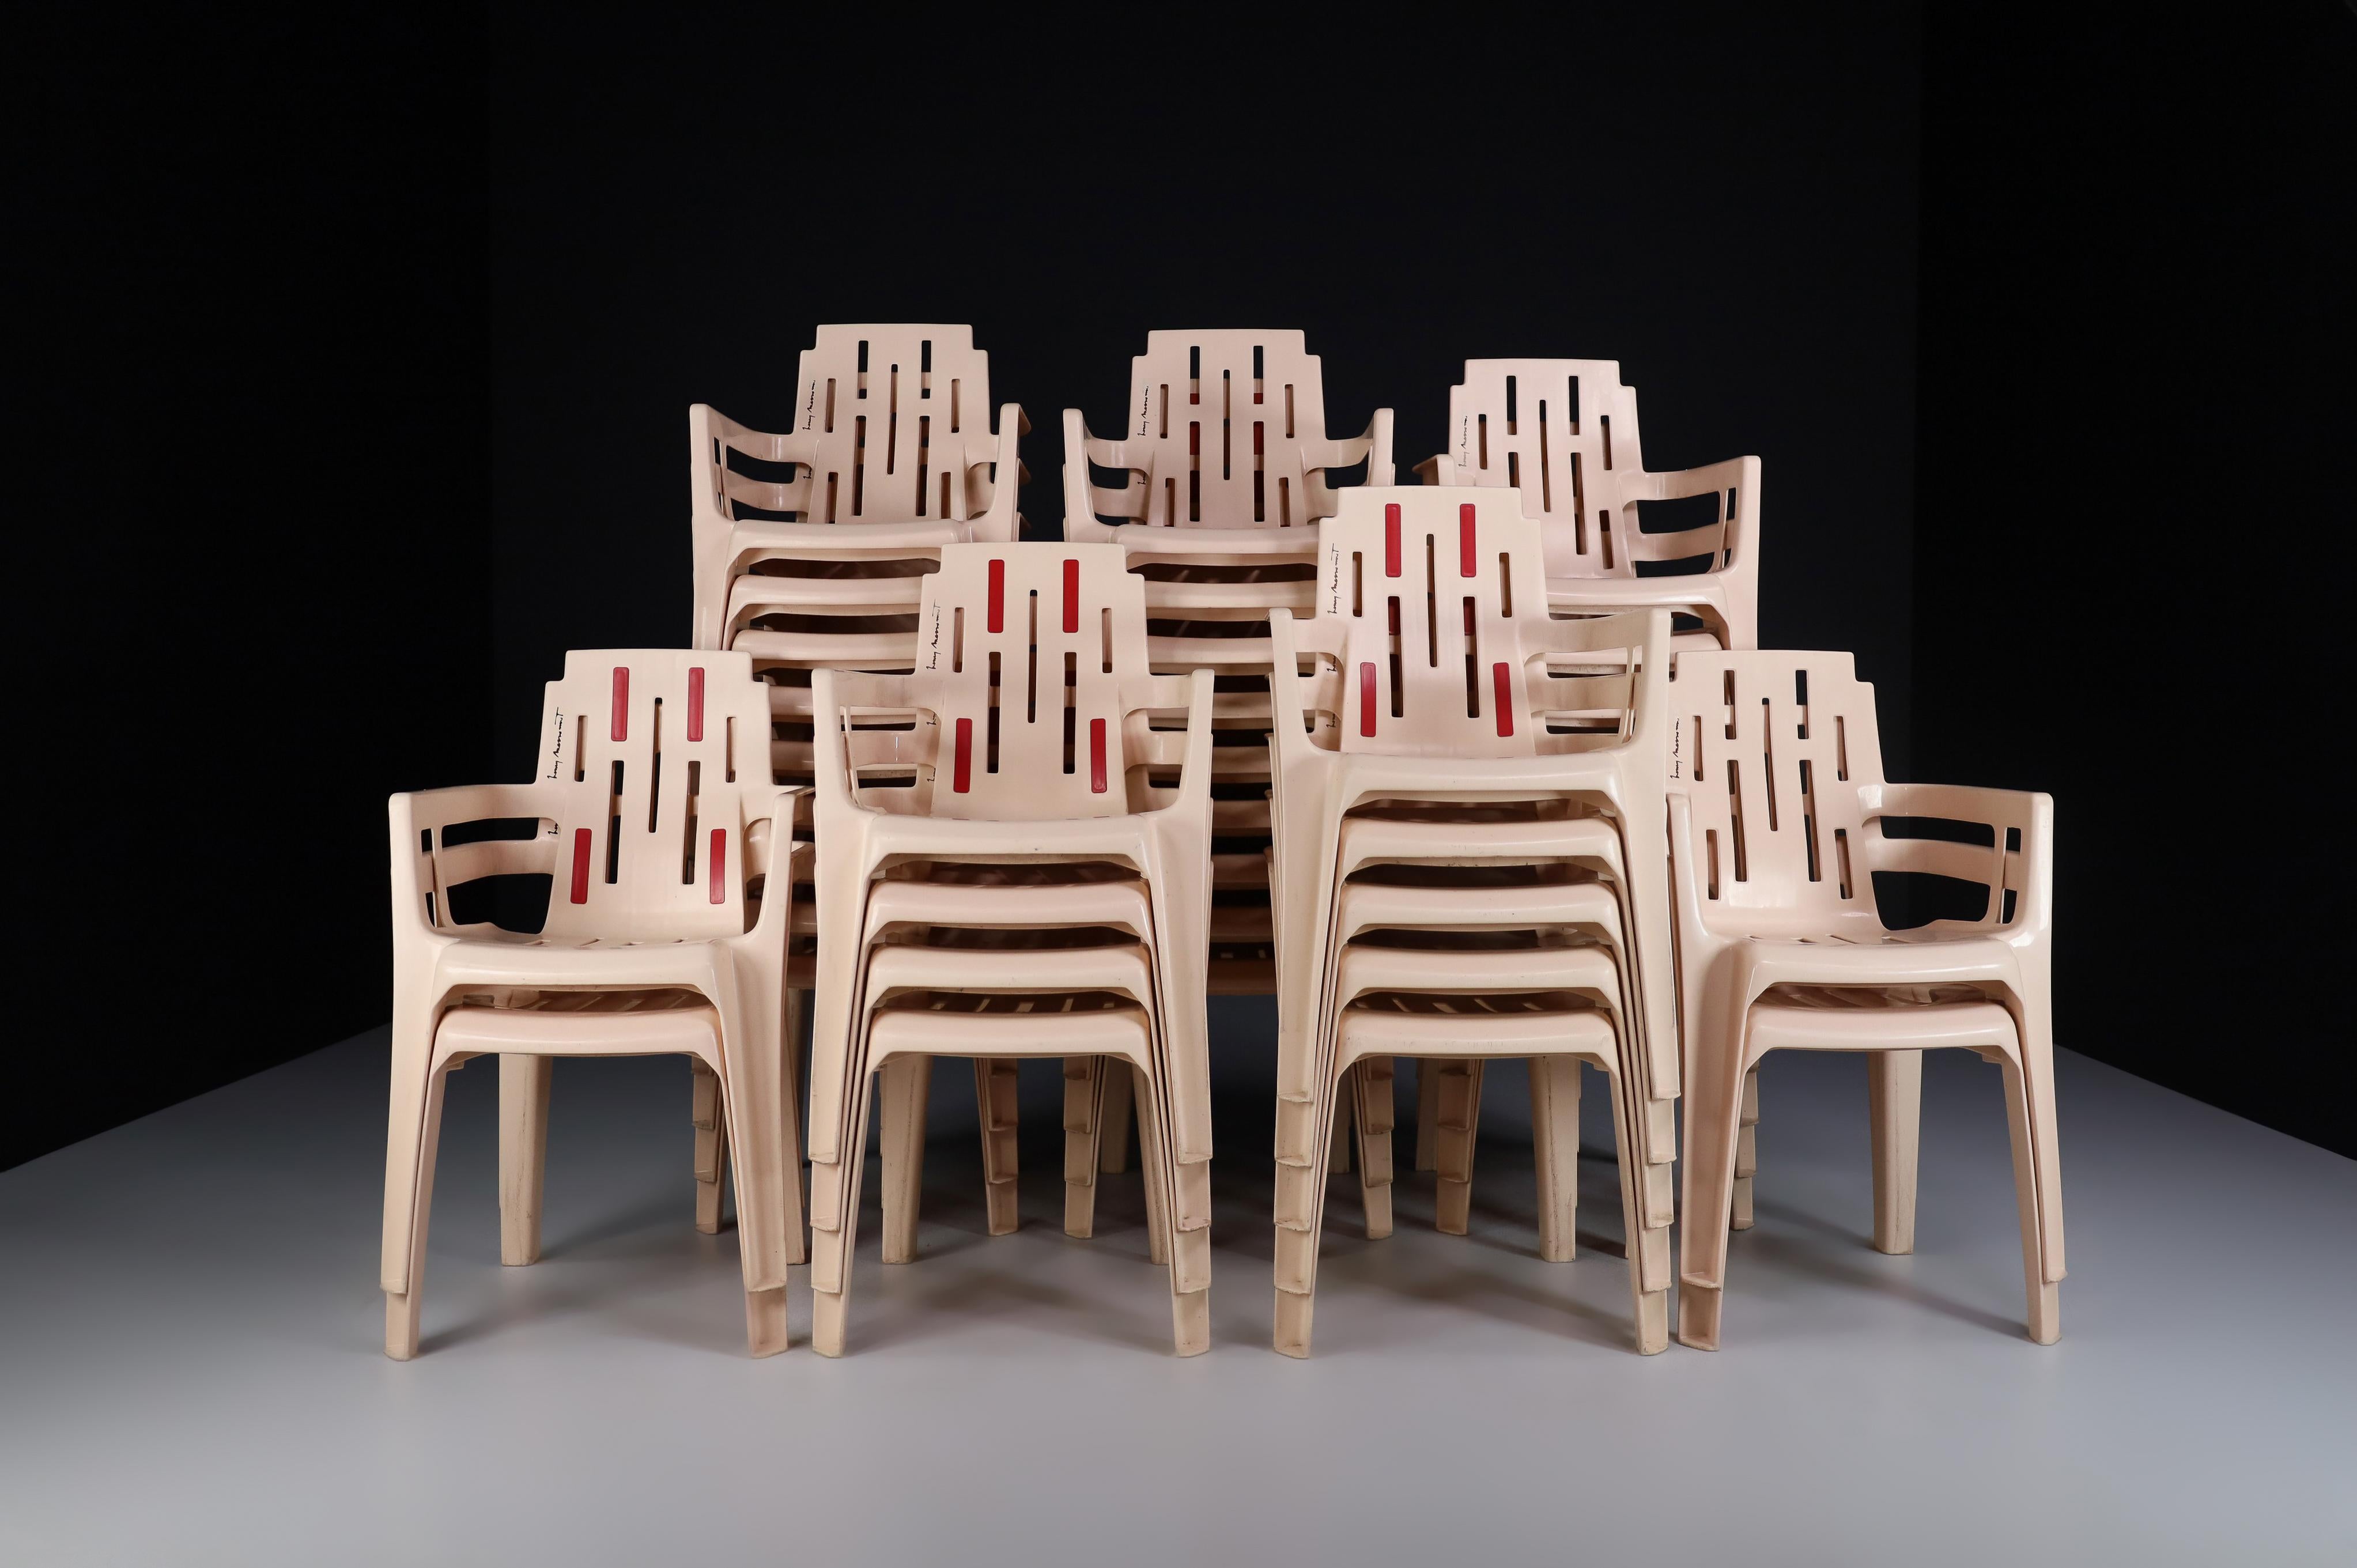 Pierre Paulin 'Boston' chairs for Henry Massonnet, France 1988

Great Group of Boston Garden chairs by Pierre Paulin inspired by Piet Mondriaan and Charles Renni Mackintosh for Henry Massonnet (France 1988 ). All are in original condition with